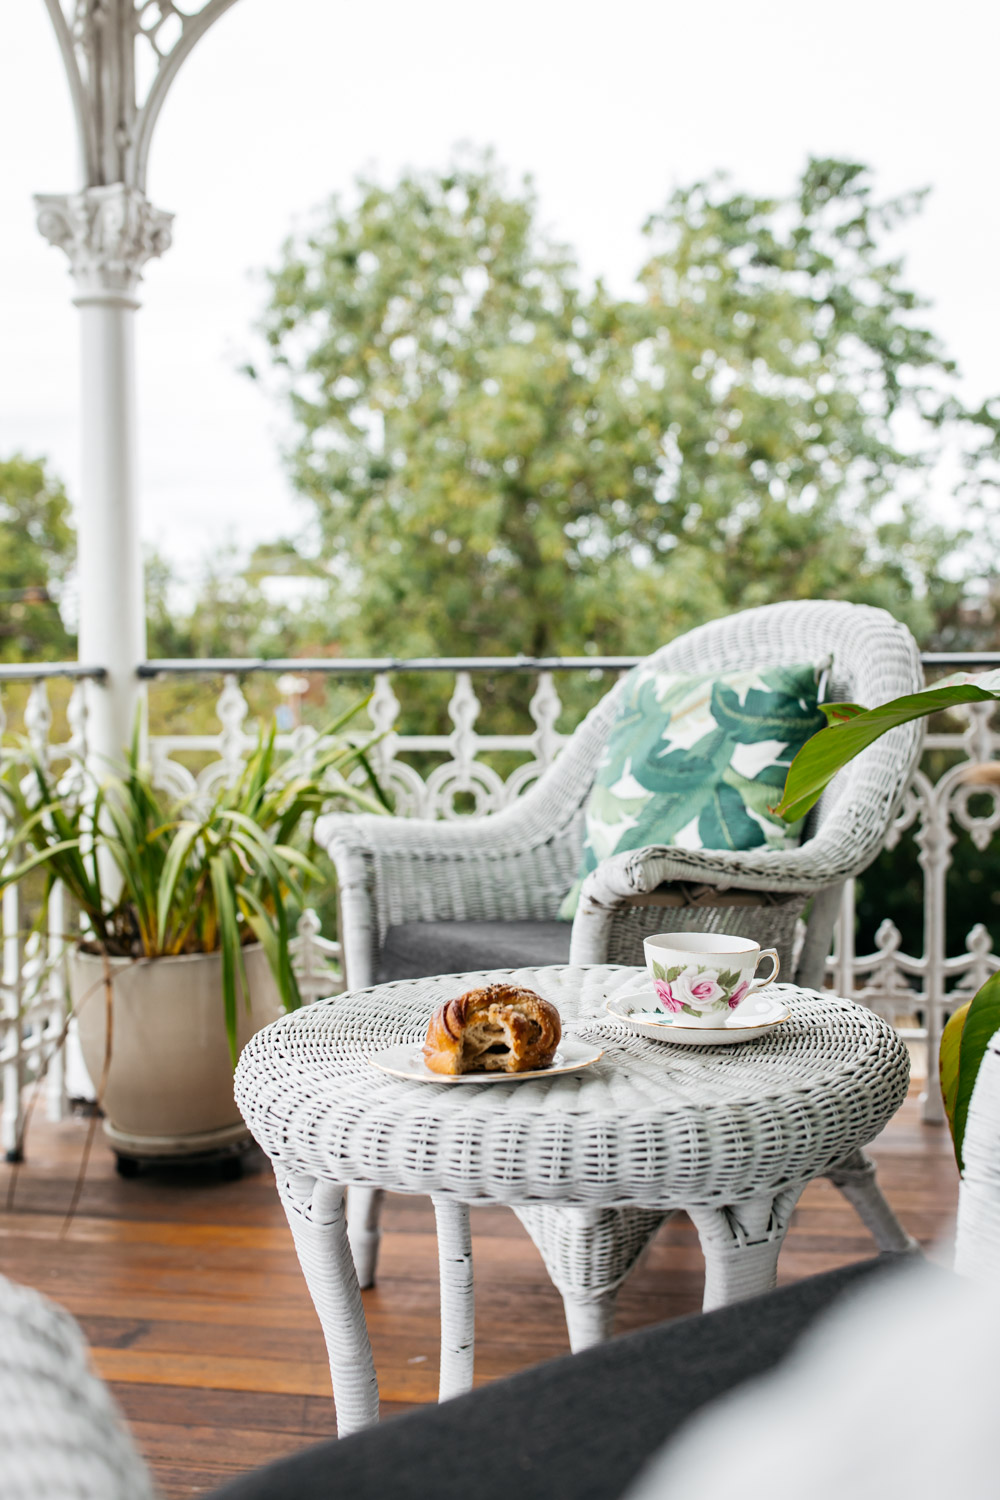 Coffee and croissant on the beautiful heritage Victorian fretwork cast iron verandah at the Post and Telegraph Boutique Accommodation in Moruya NSW